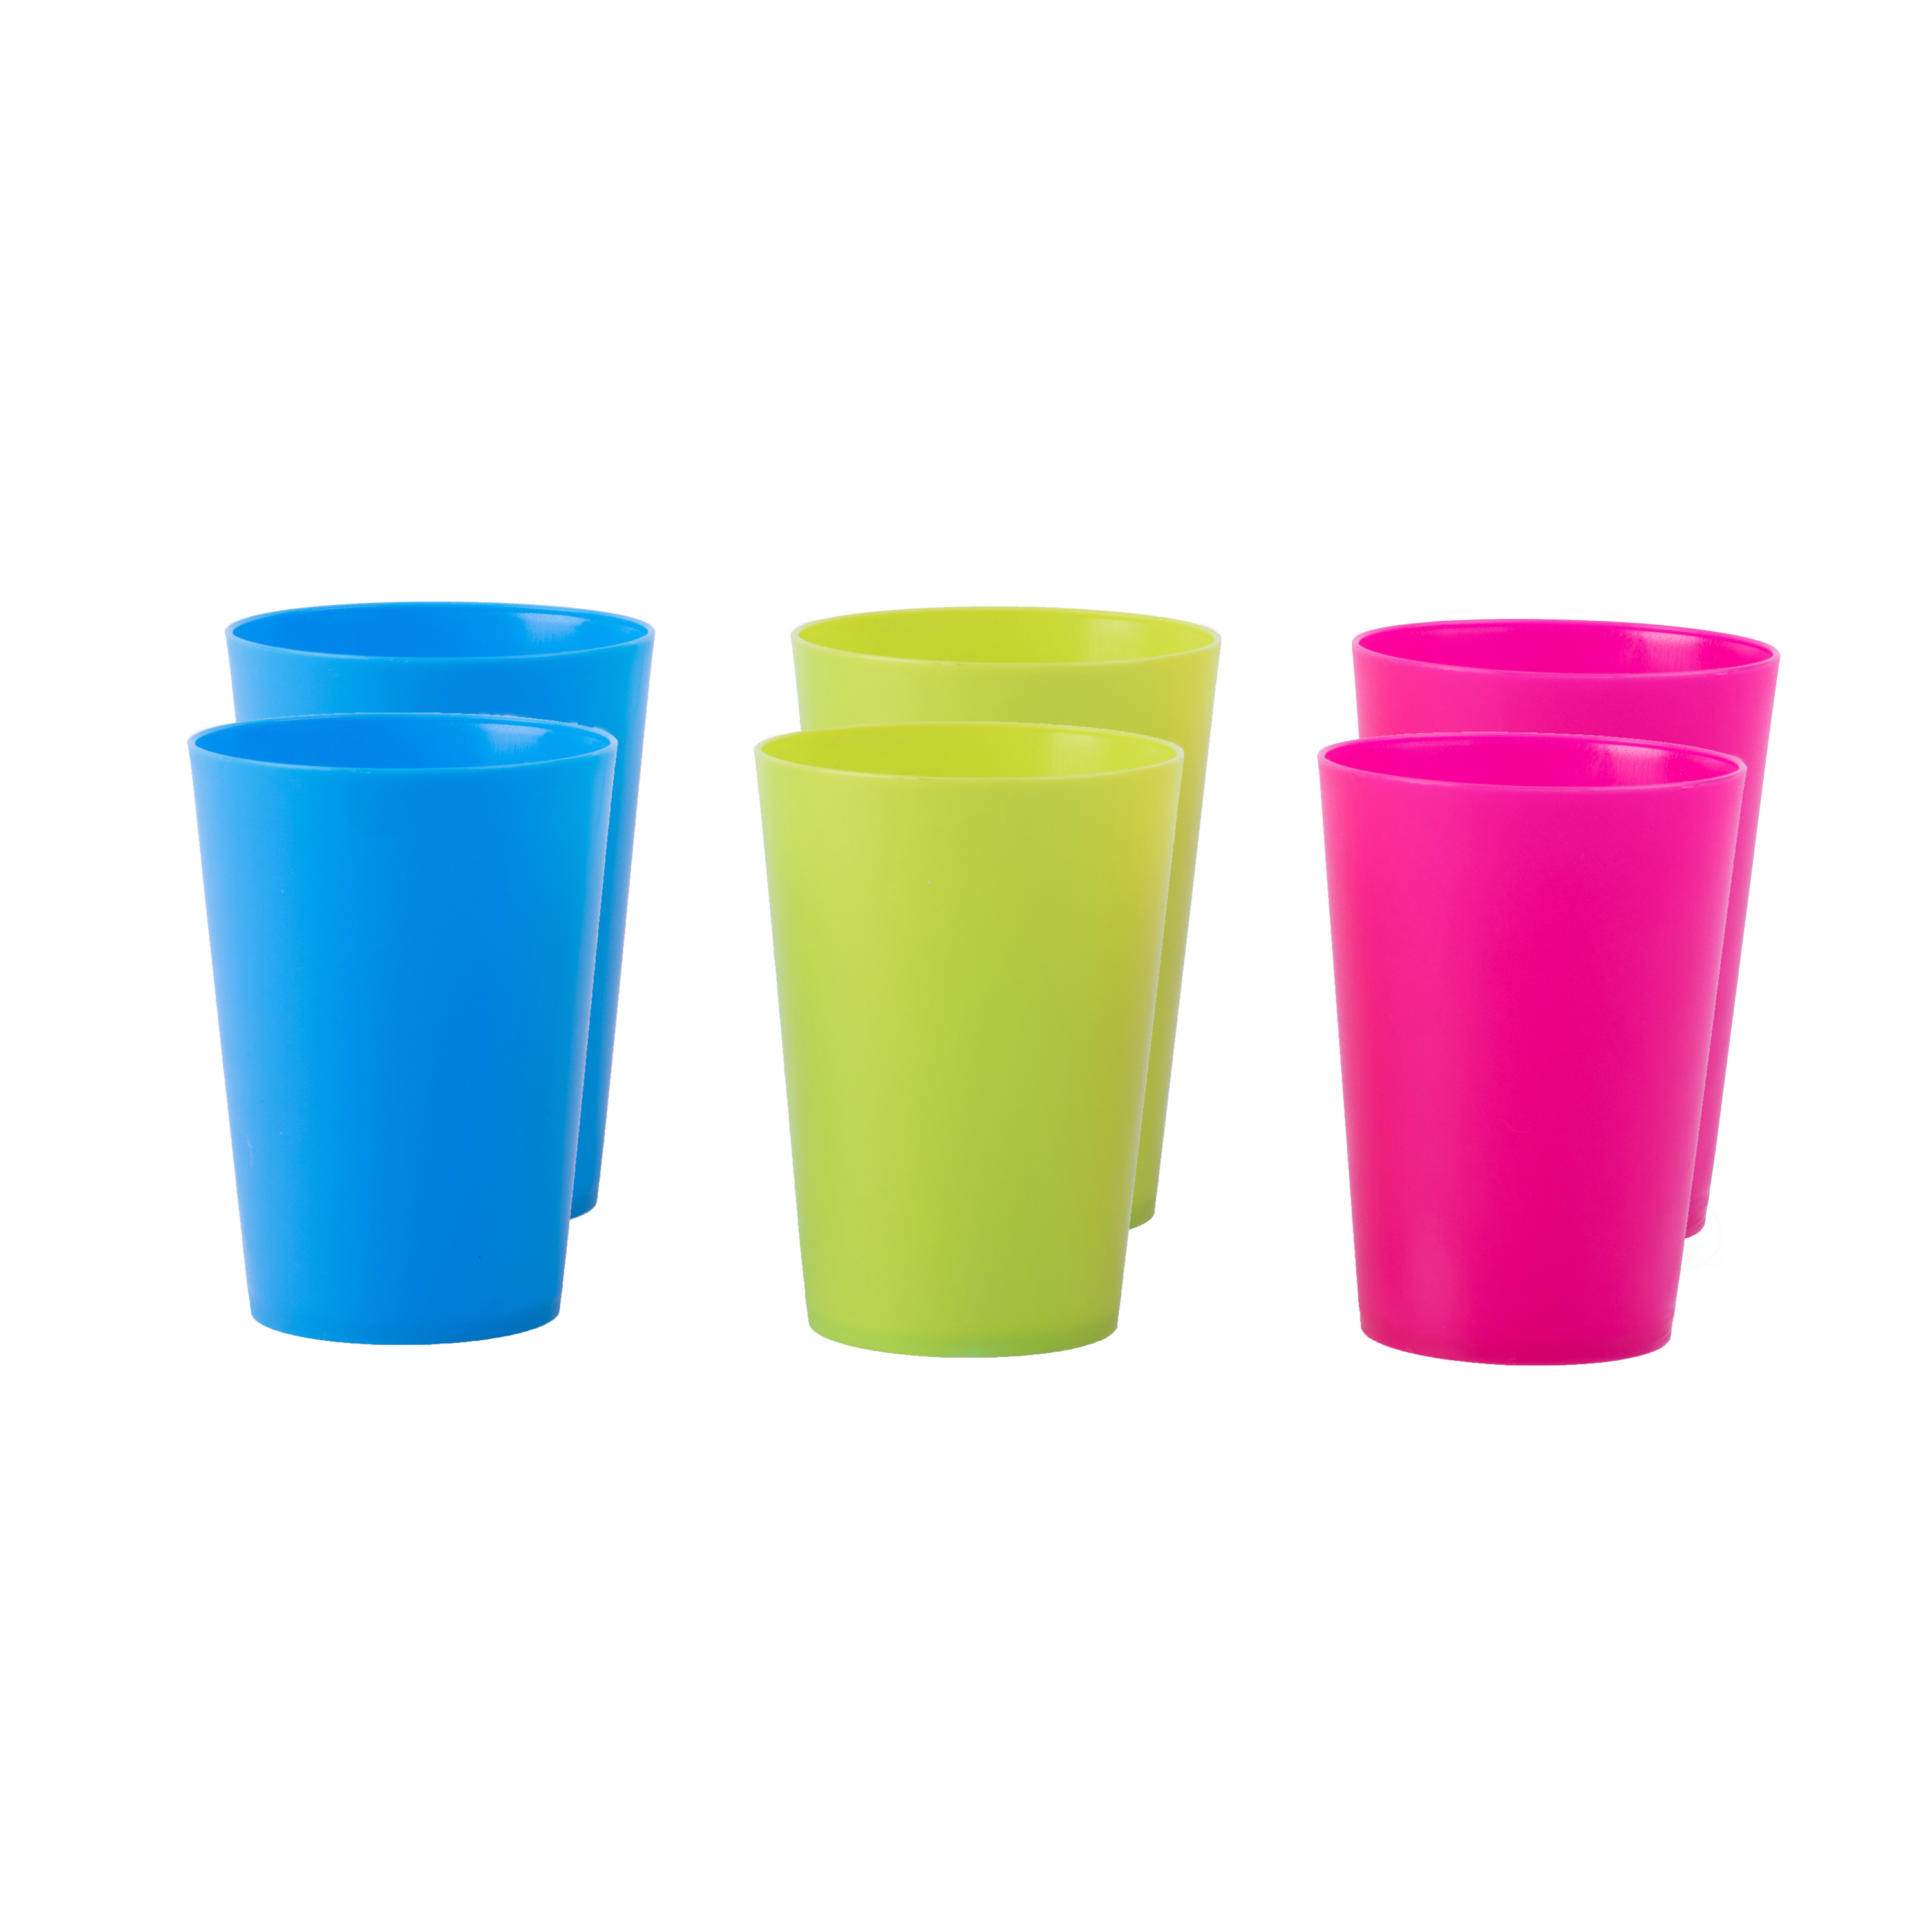 Plastic Reusable Cups 7 OZ Set Of 6 (2 Red, 2 Green, 2 Blue)